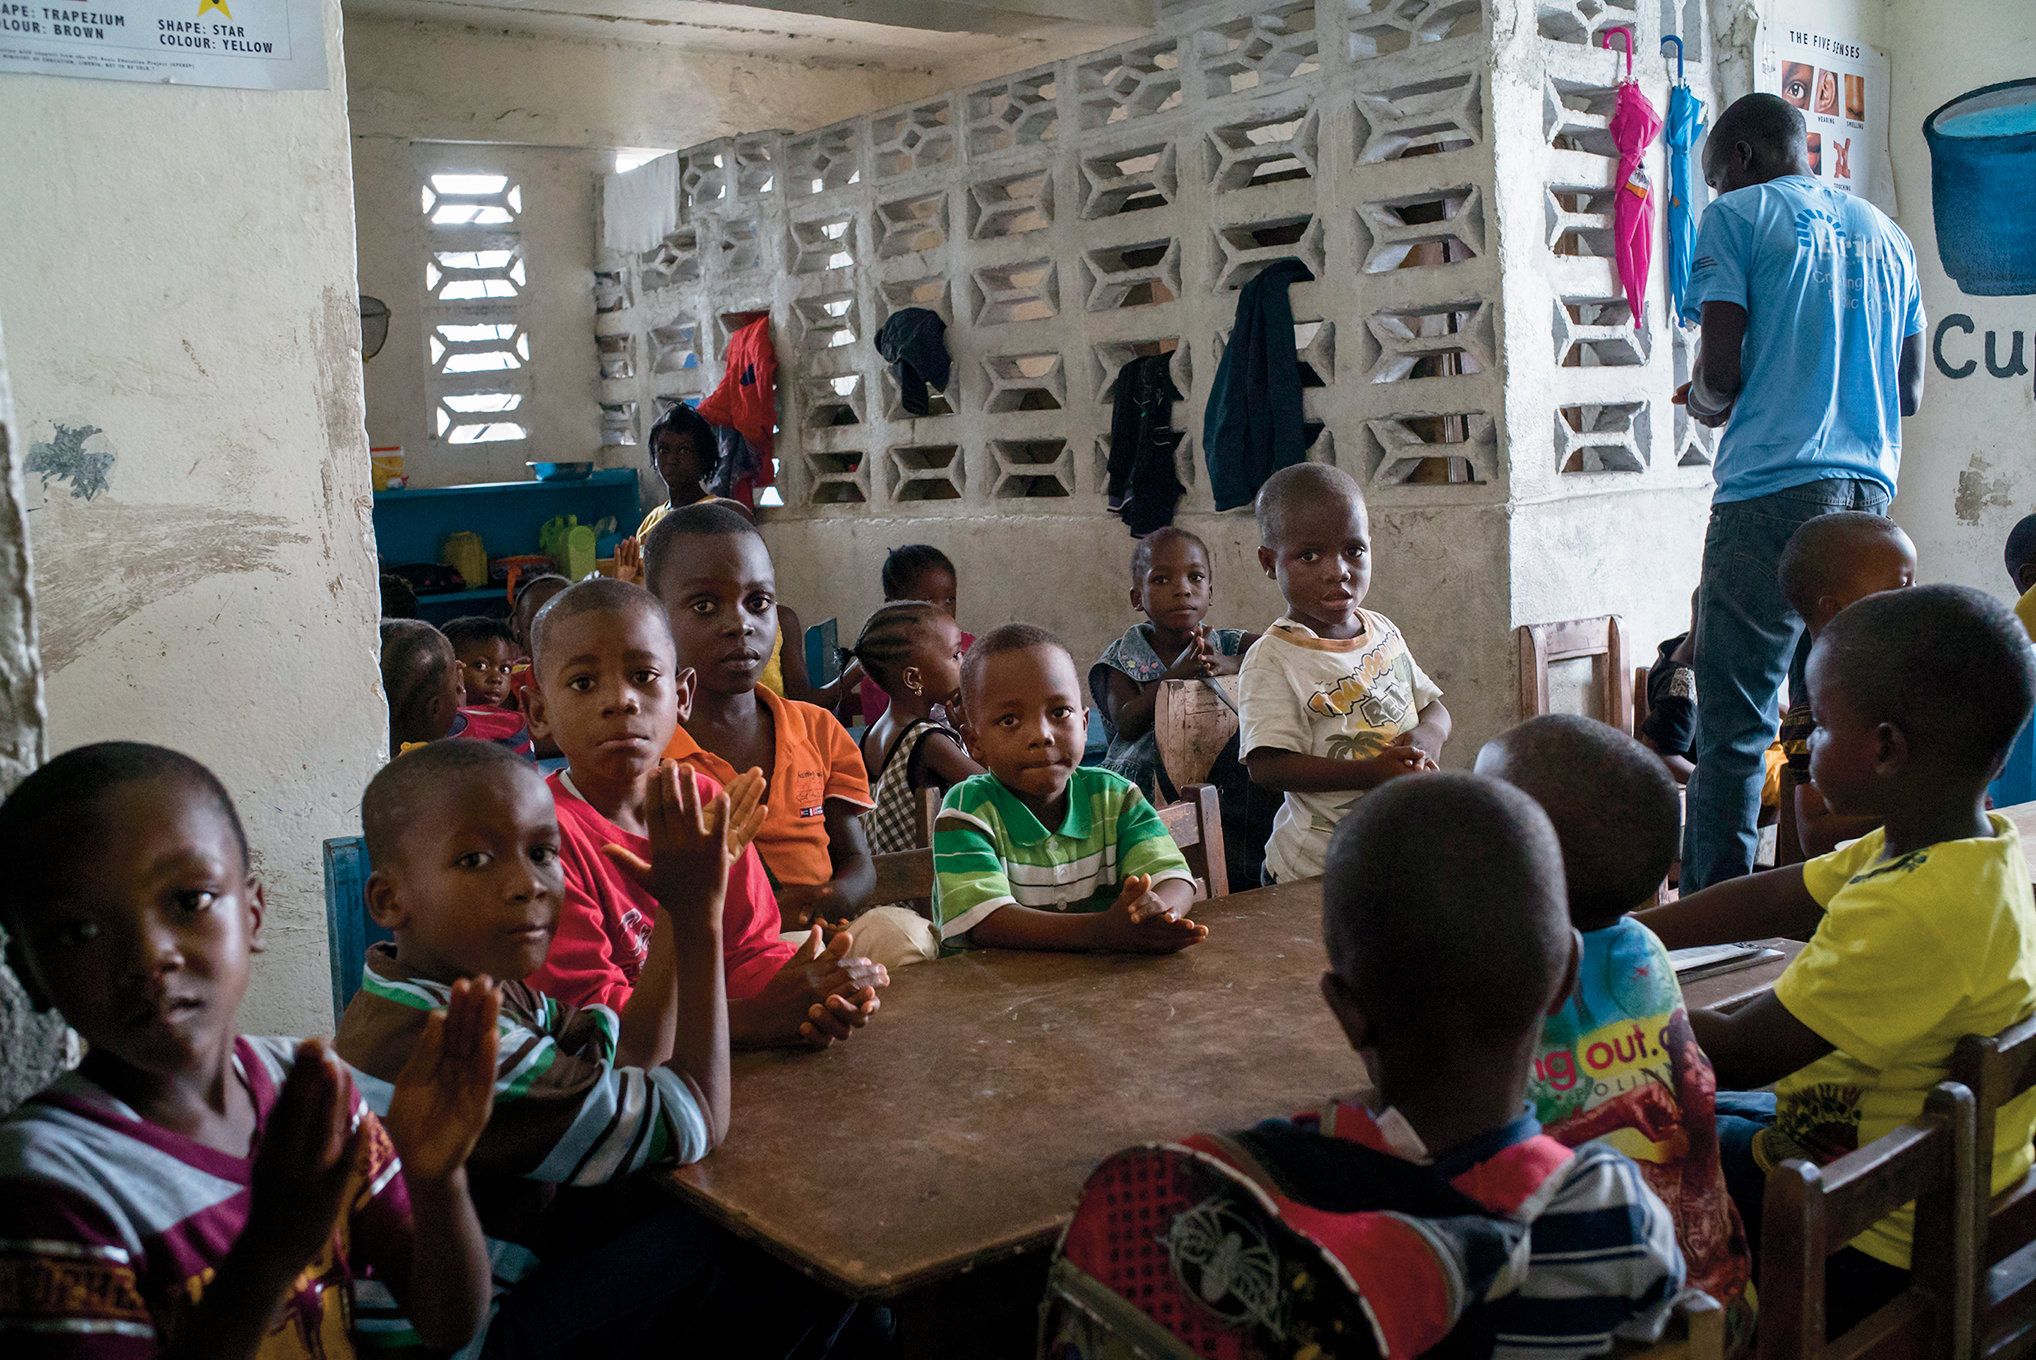 A Bridge school in Monrovia. Image by Diana Zeyneb Alhindawi for The New York Times. Liberia, 2017.